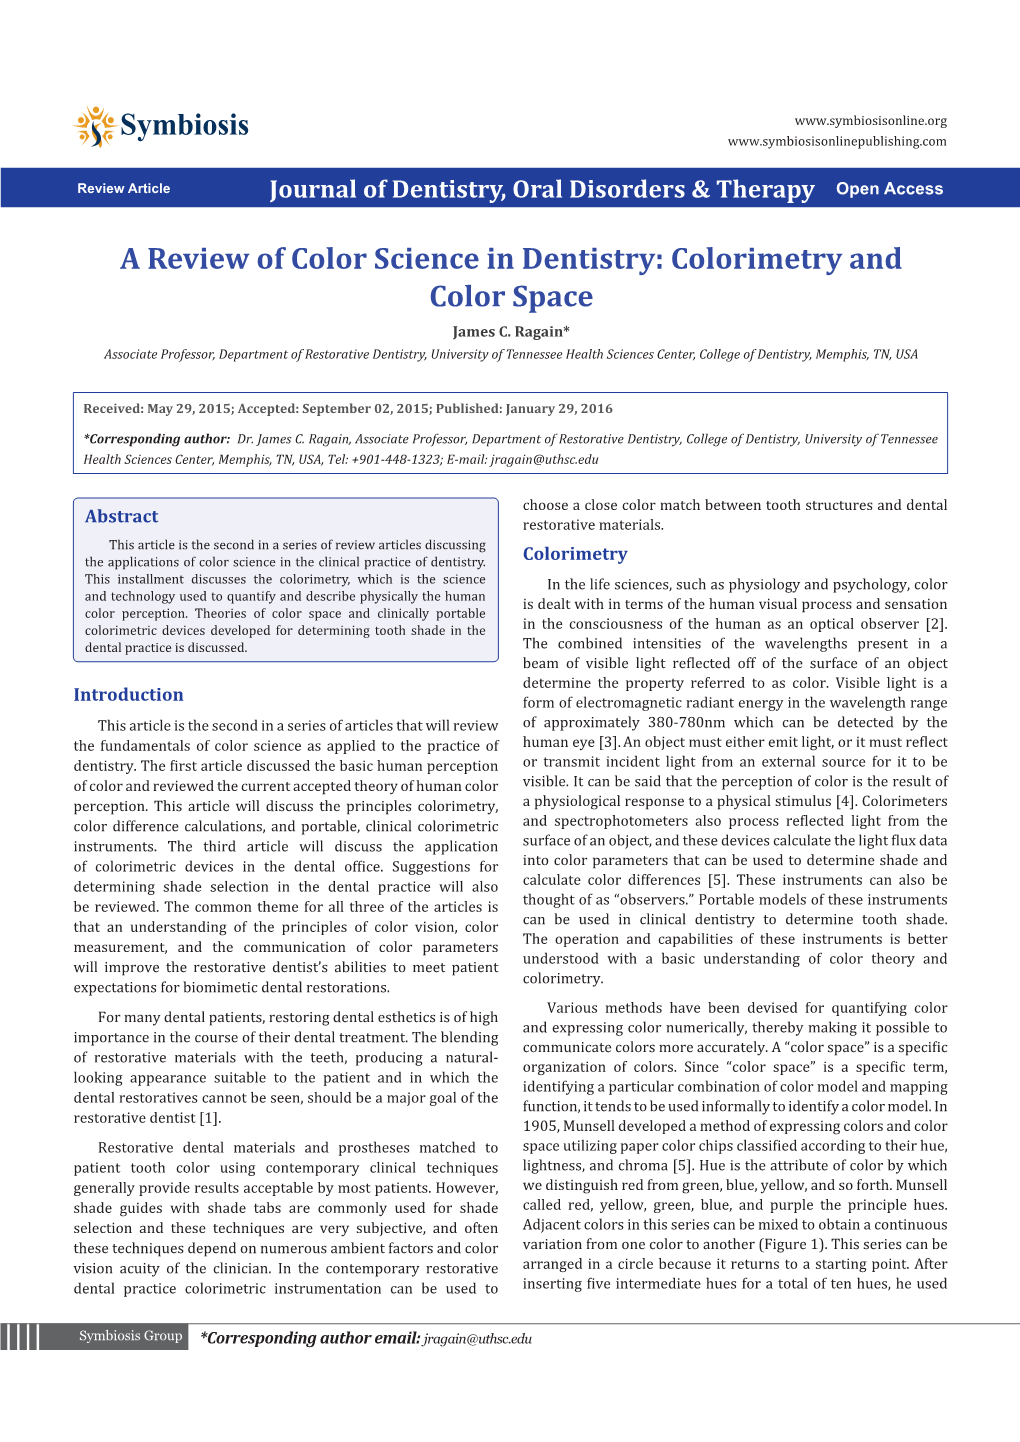 A Review of Color Science in Dentistry: Colorimetry and Color Space James C